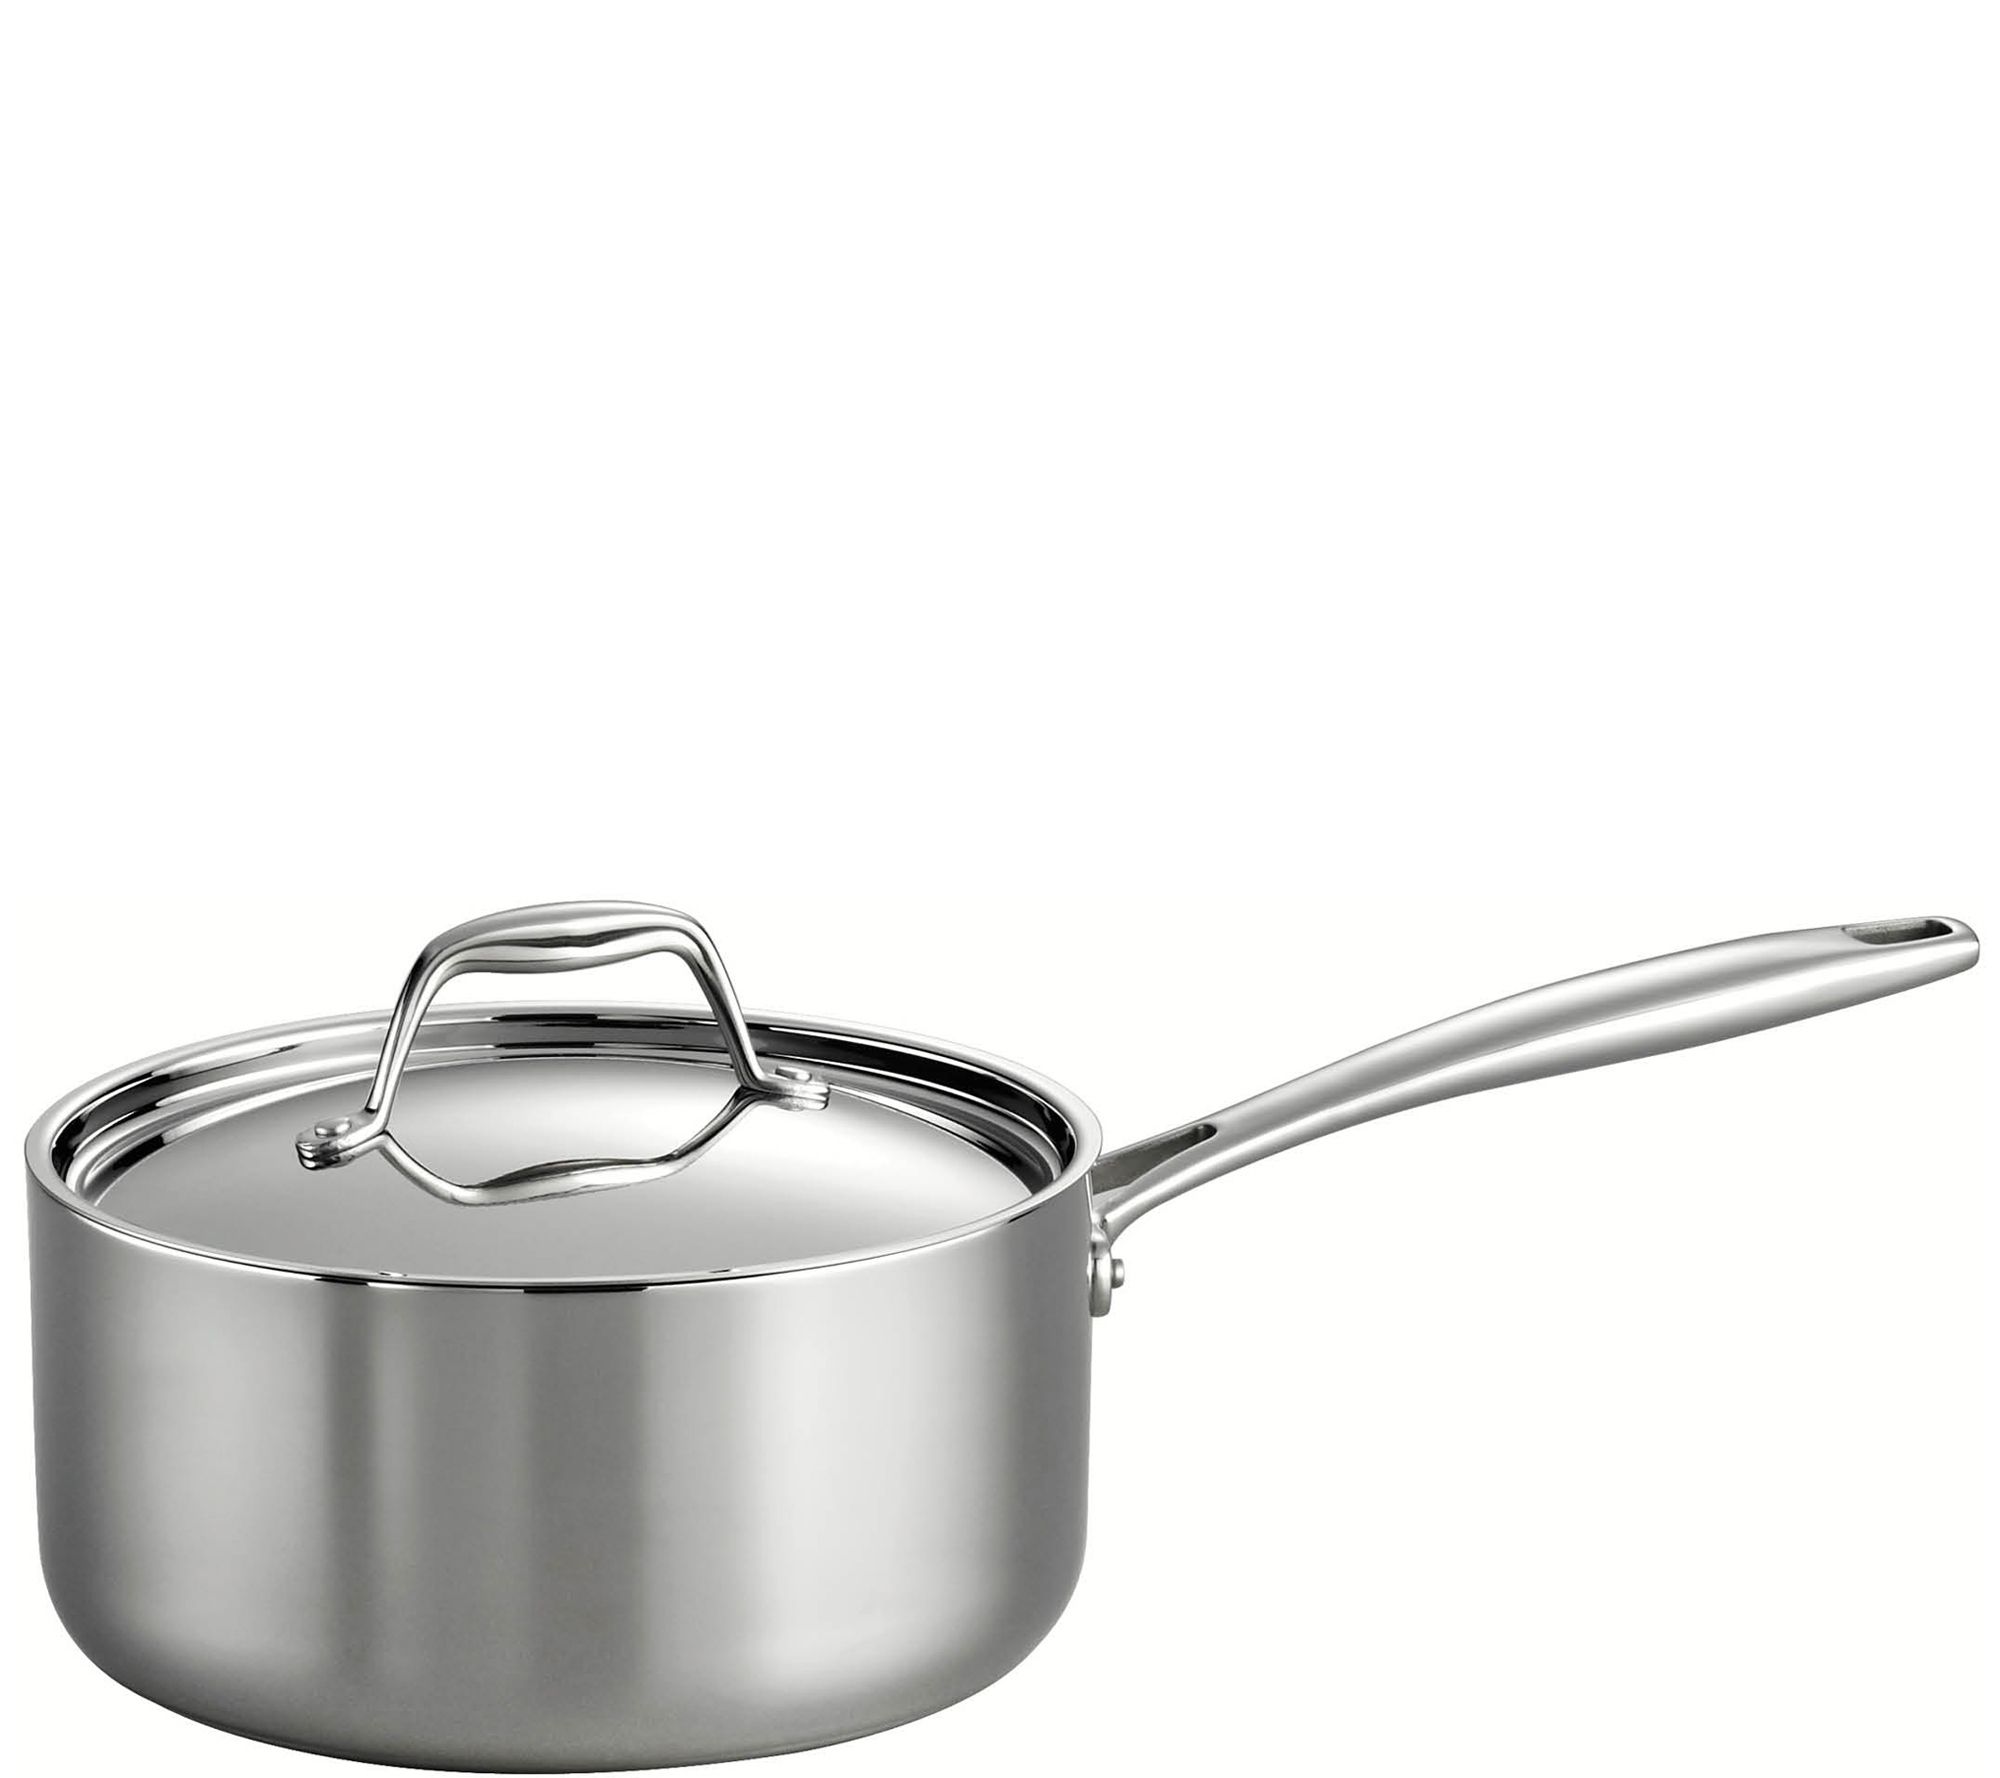 Tramontina Gourmet Tri-Ply Clad Stainless Steel 3-qt. Saucepan